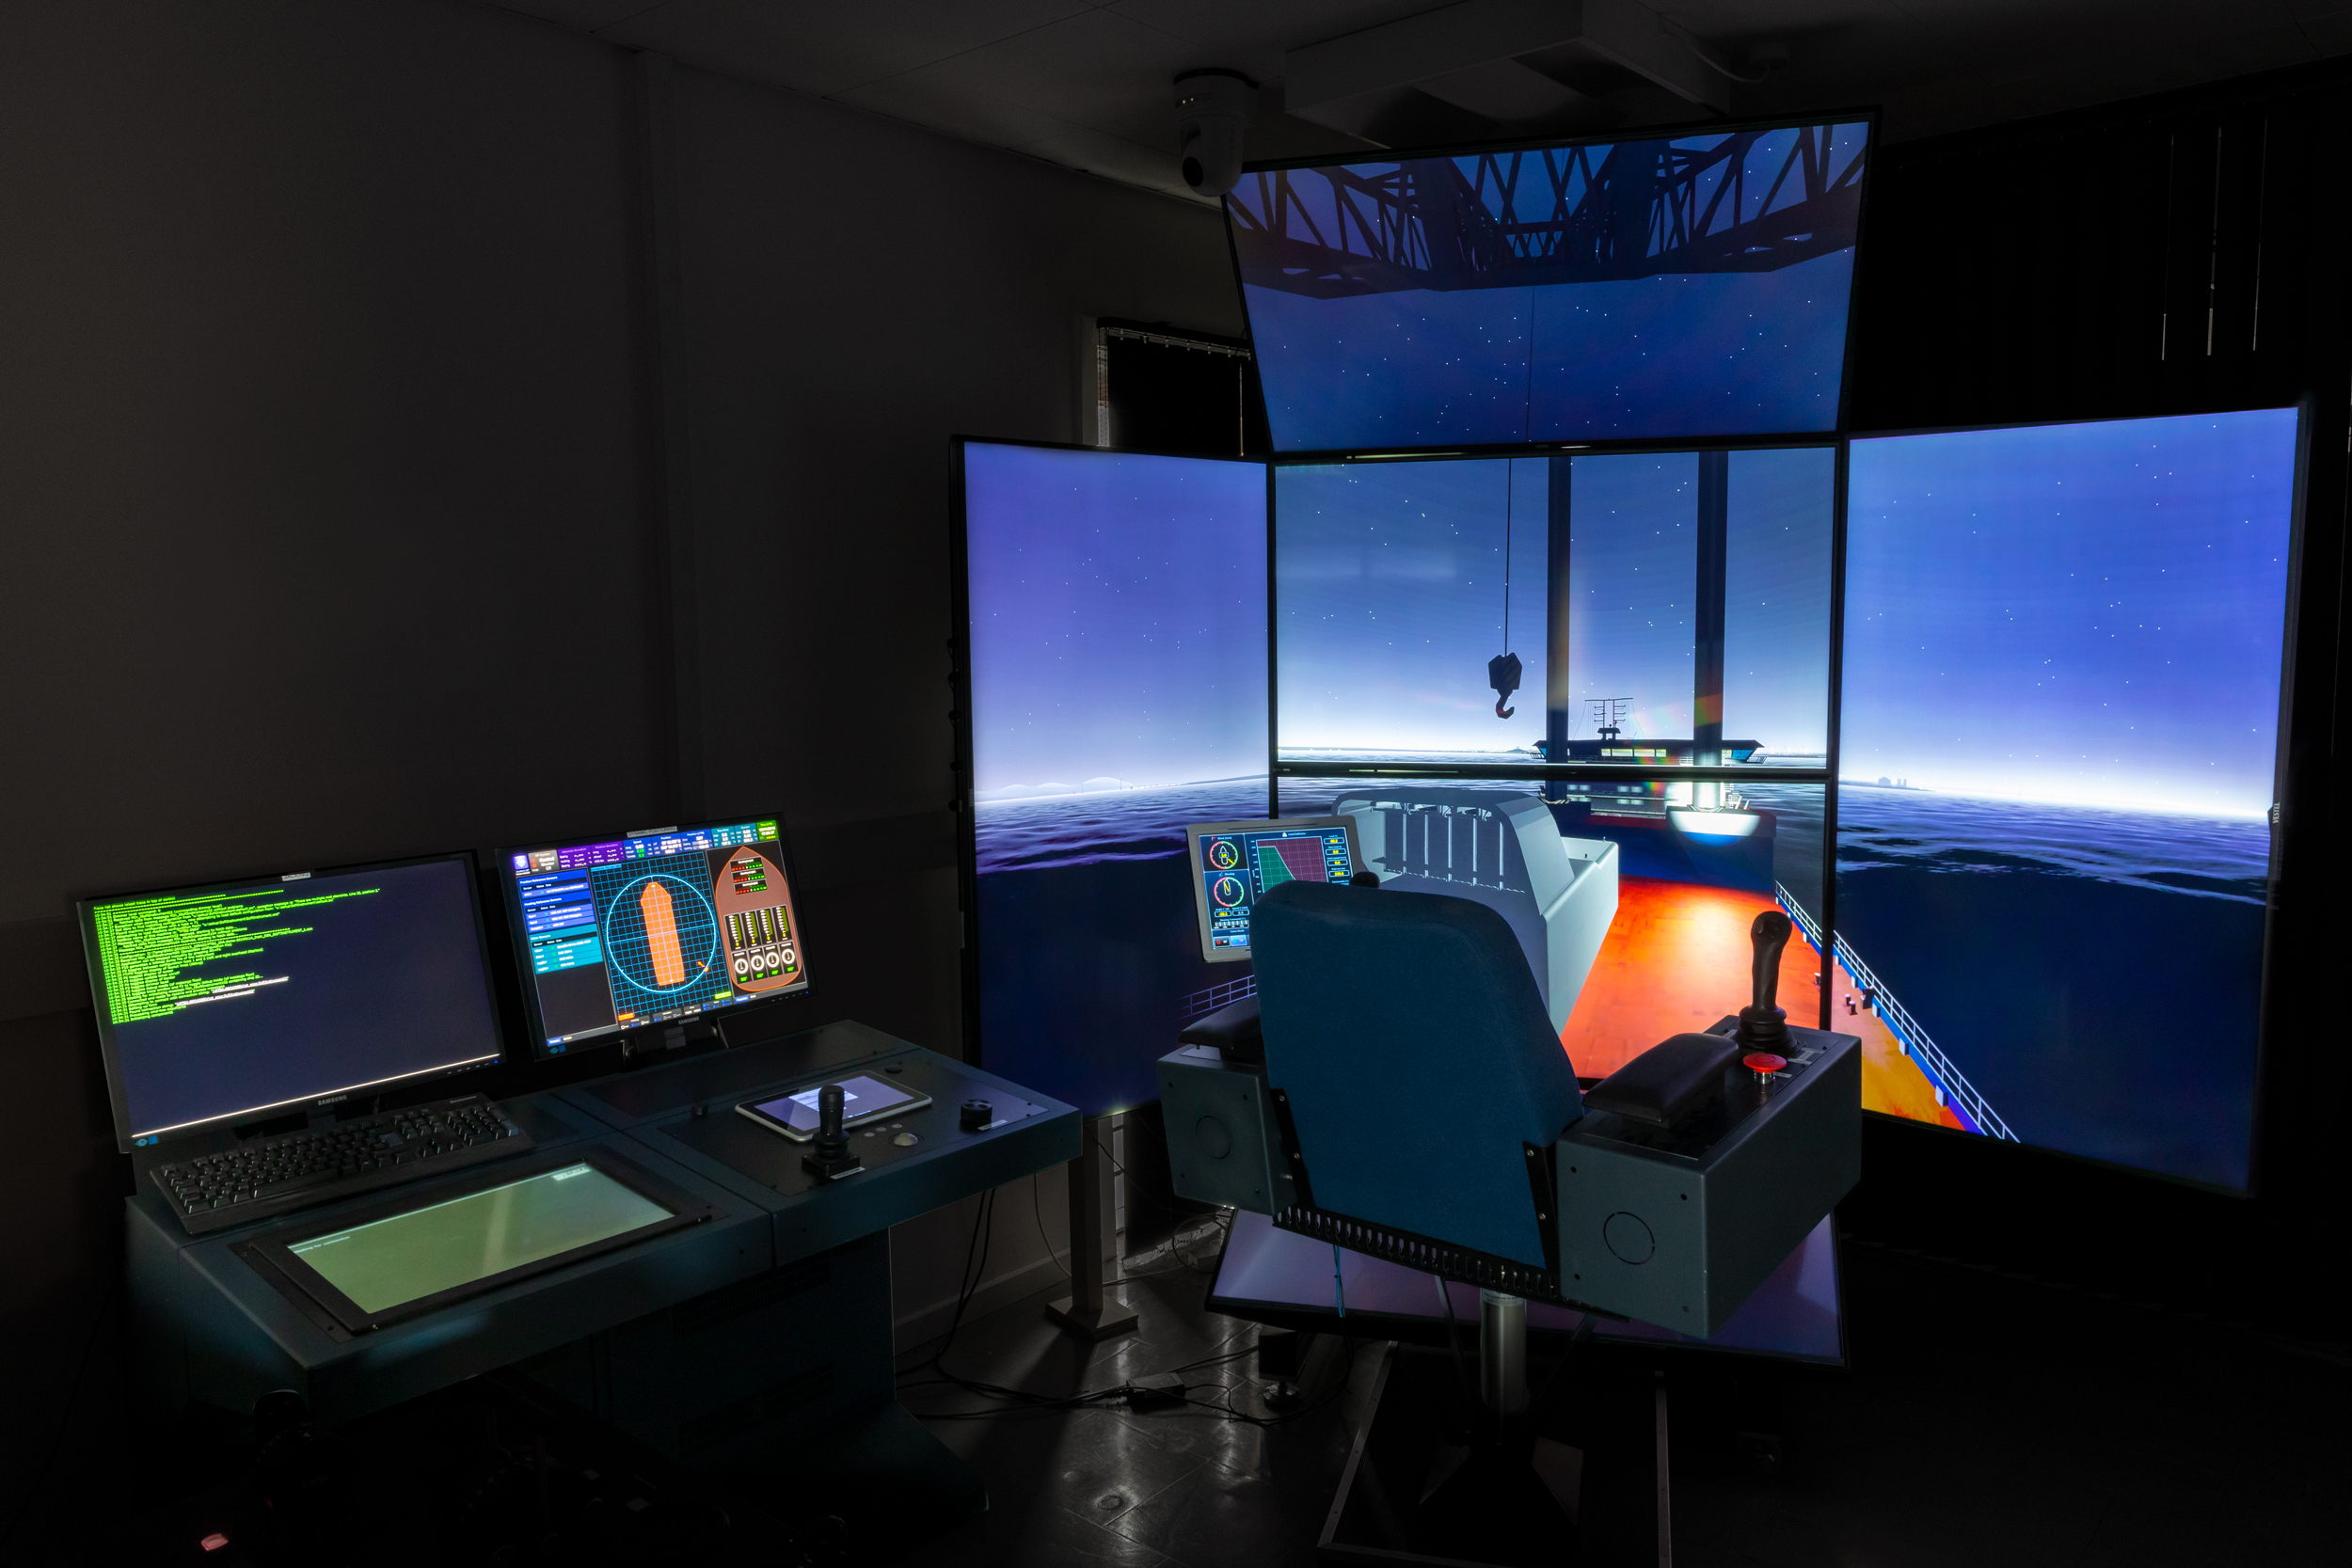 Overview of the entire crane simulator system.